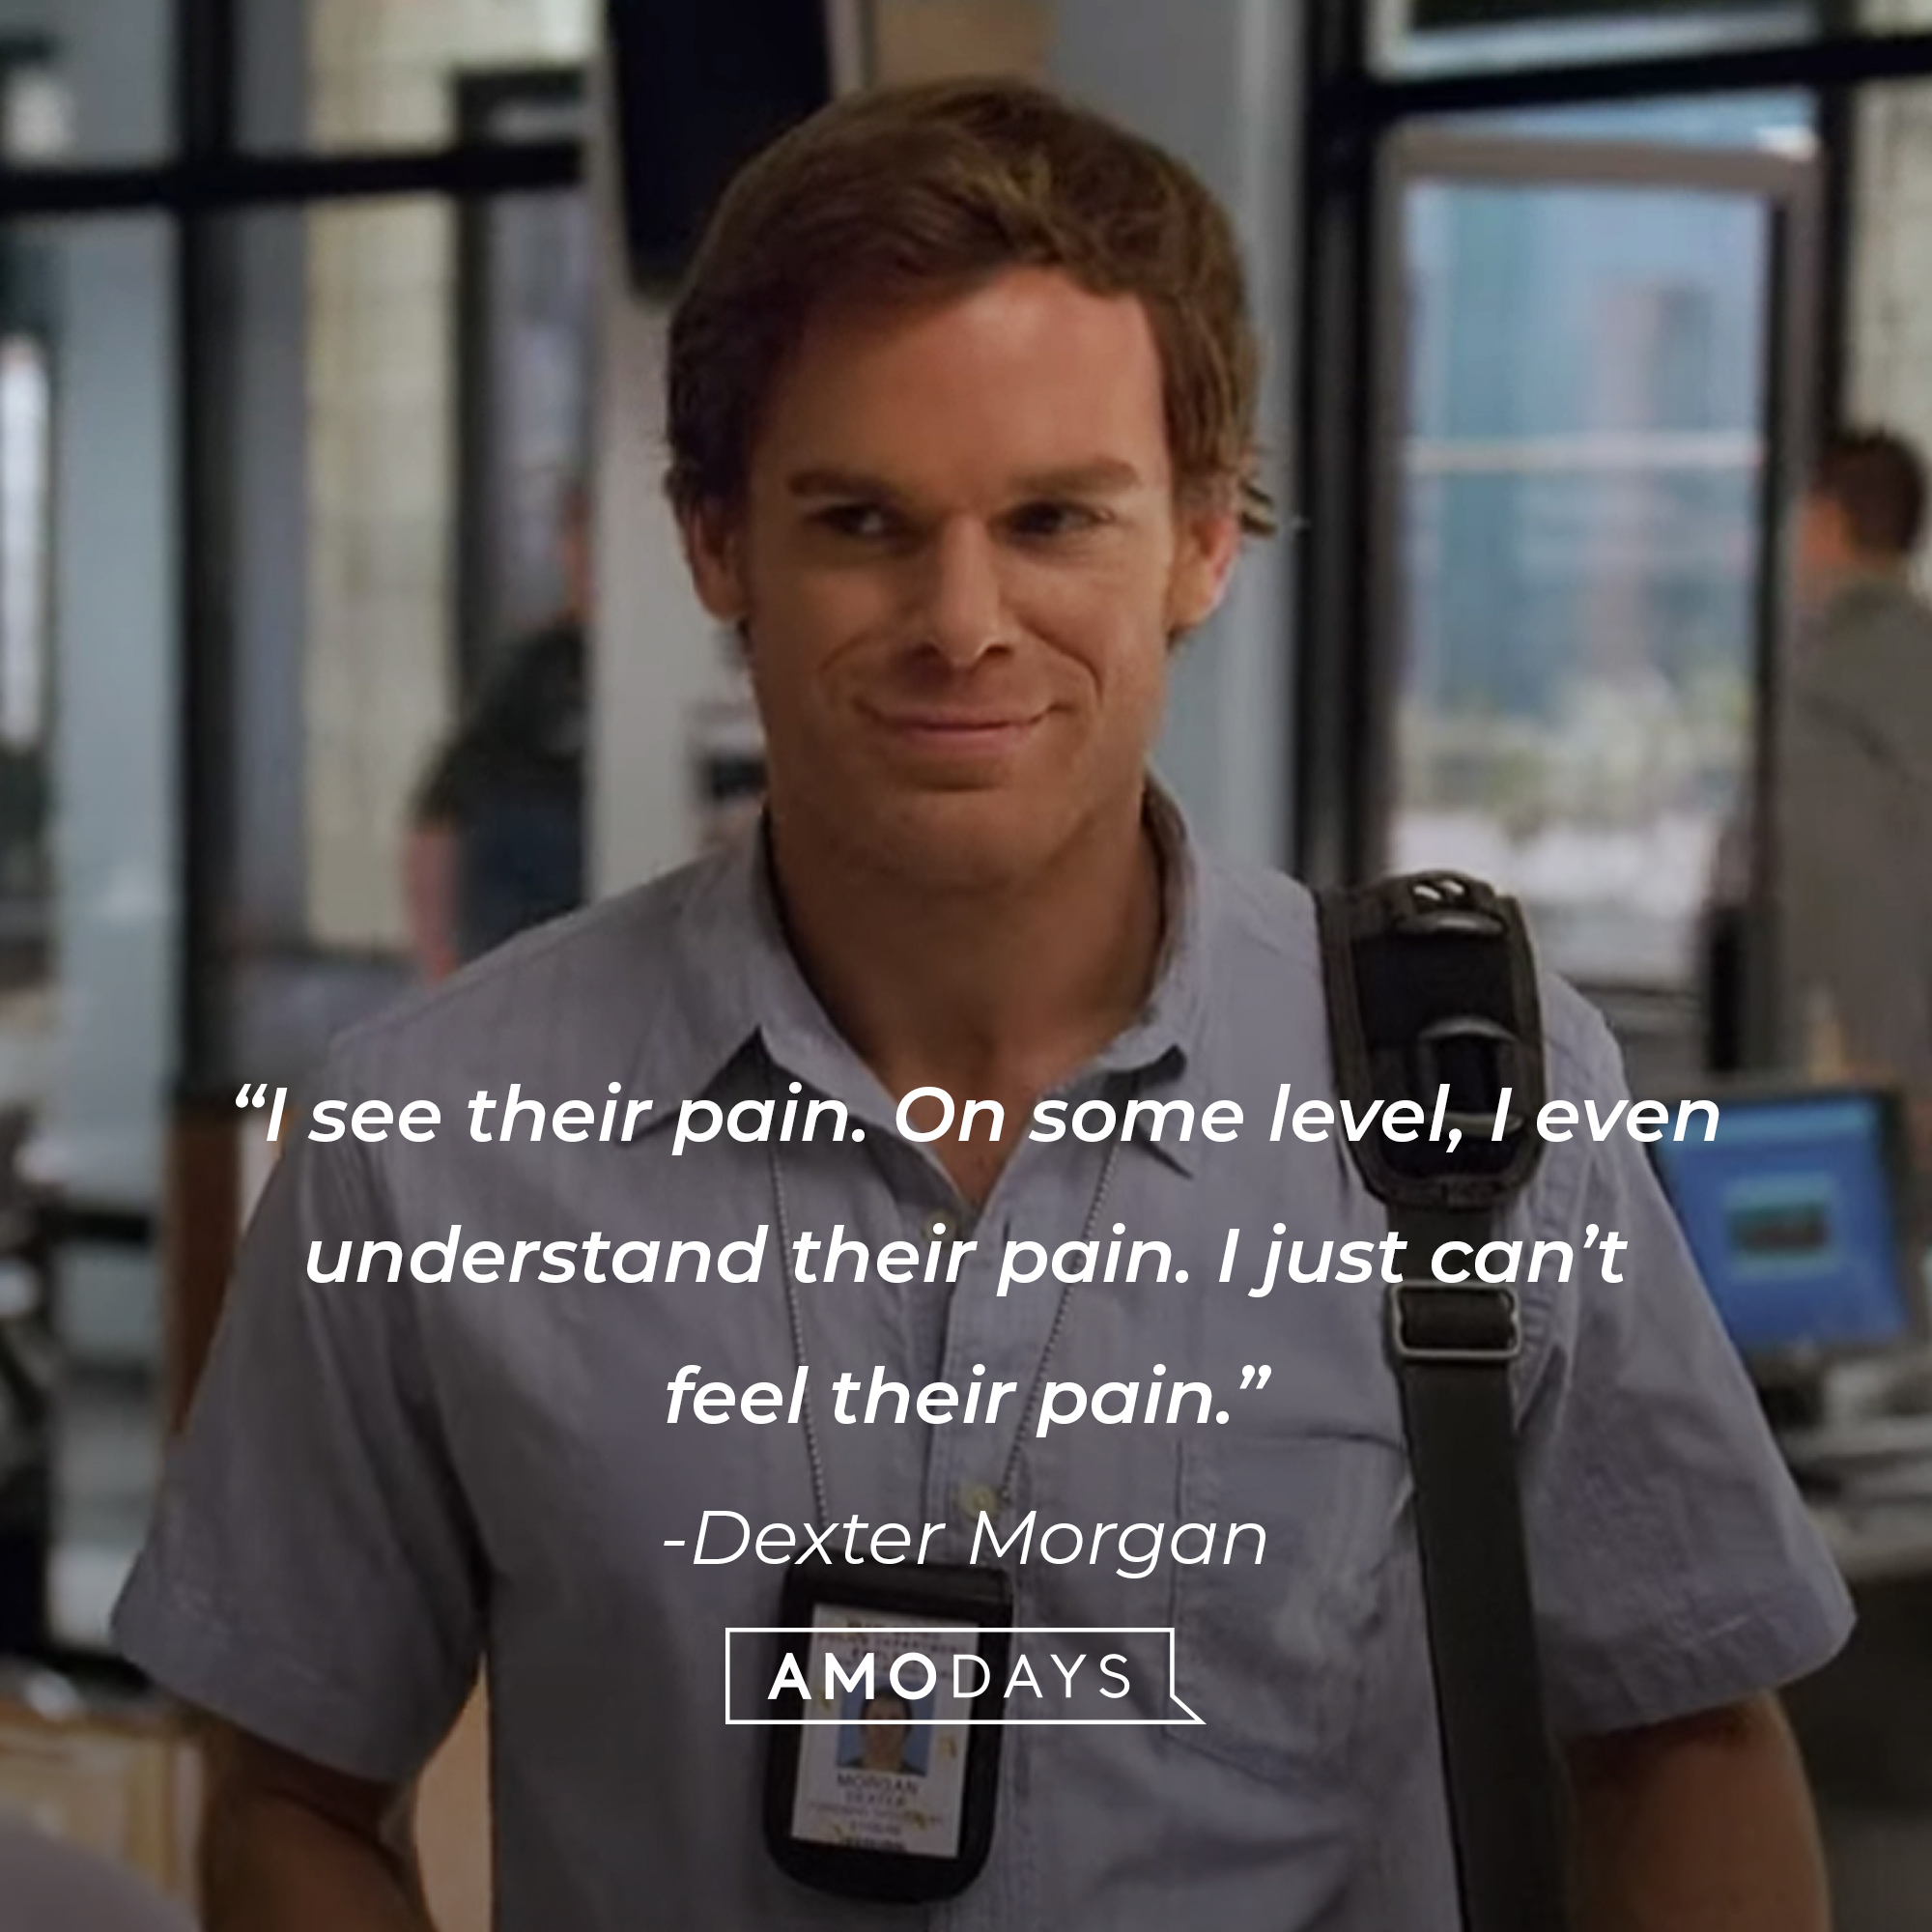 Dexter Morgan, with his quote: “I see their pain. On some level, I even understand their pain. I just can’t feel their pain.”   | Source: Showtime